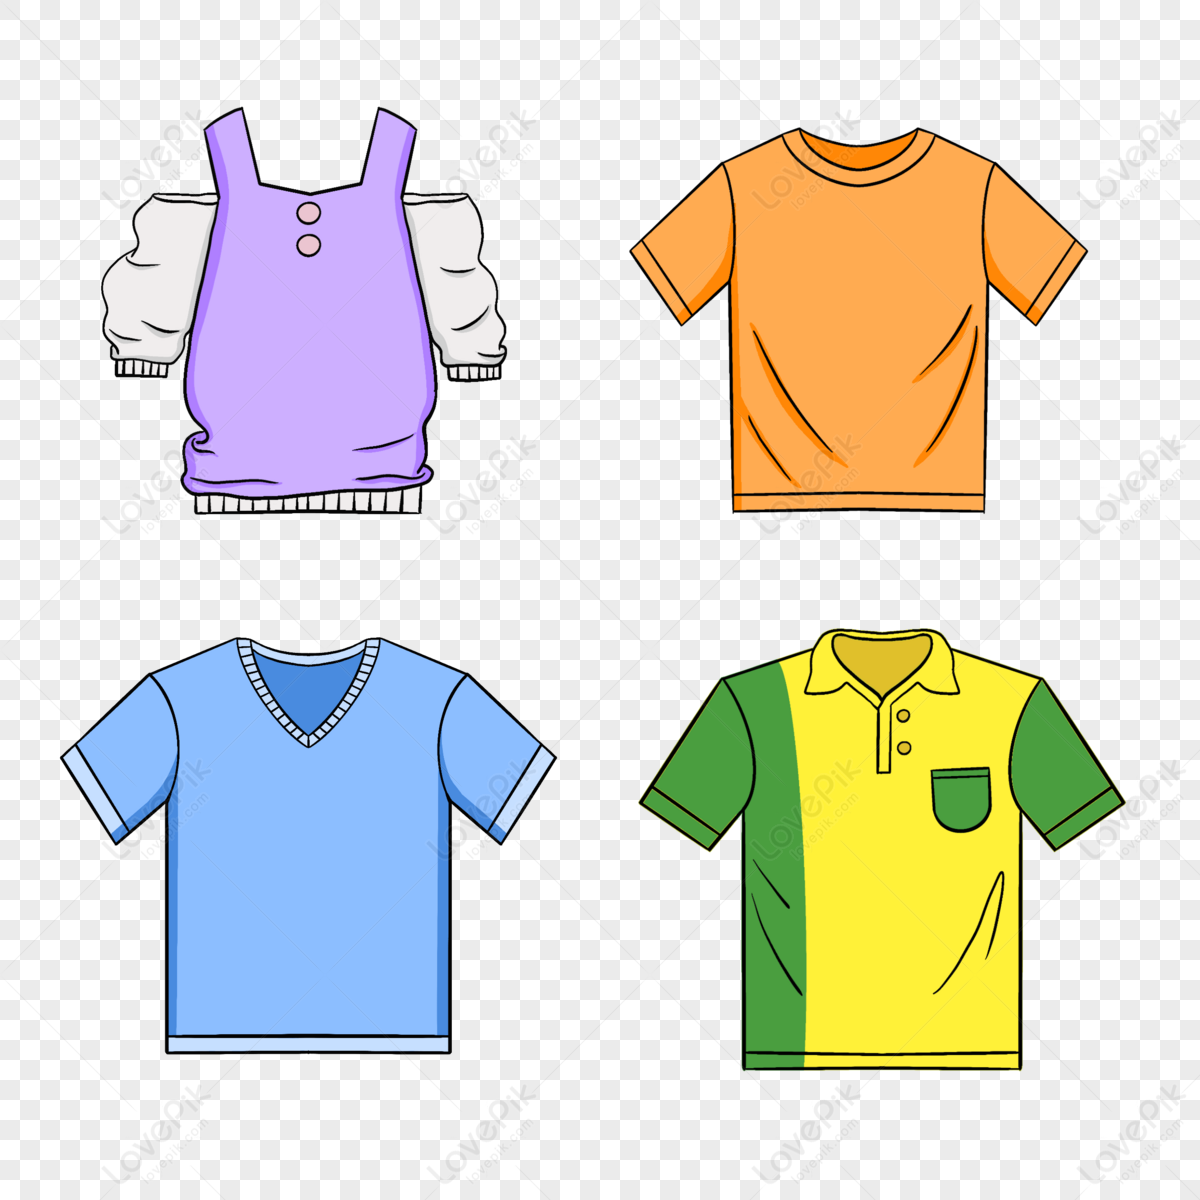 Cartoon Shirt PNG Images With Transparent Background